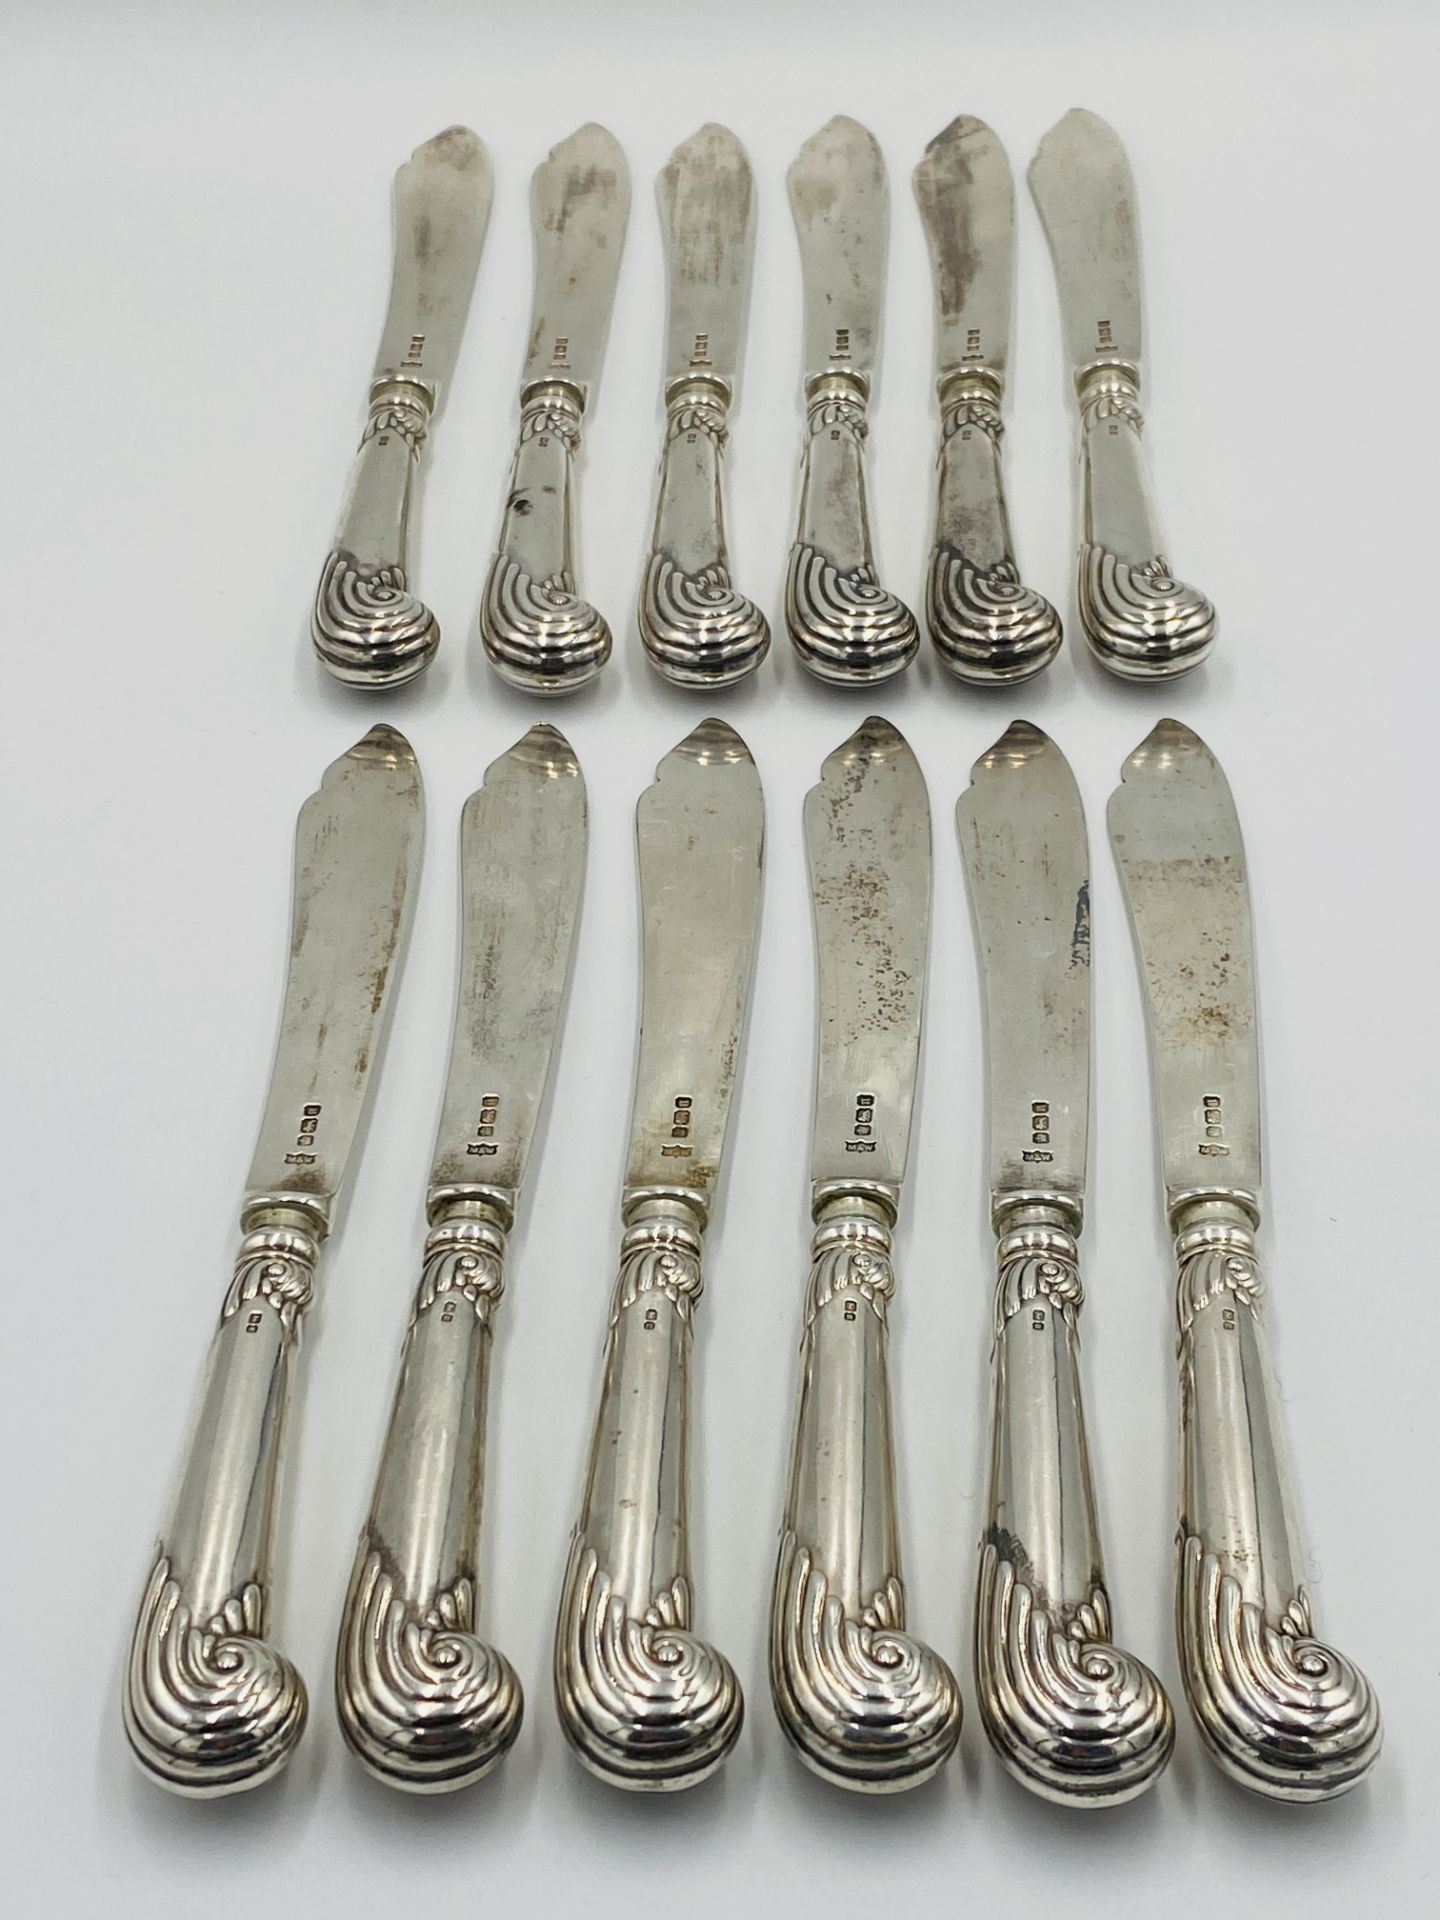 Twelve place set of silver pistol grip fish knives and forks, London 1905 - Image 2 of 11